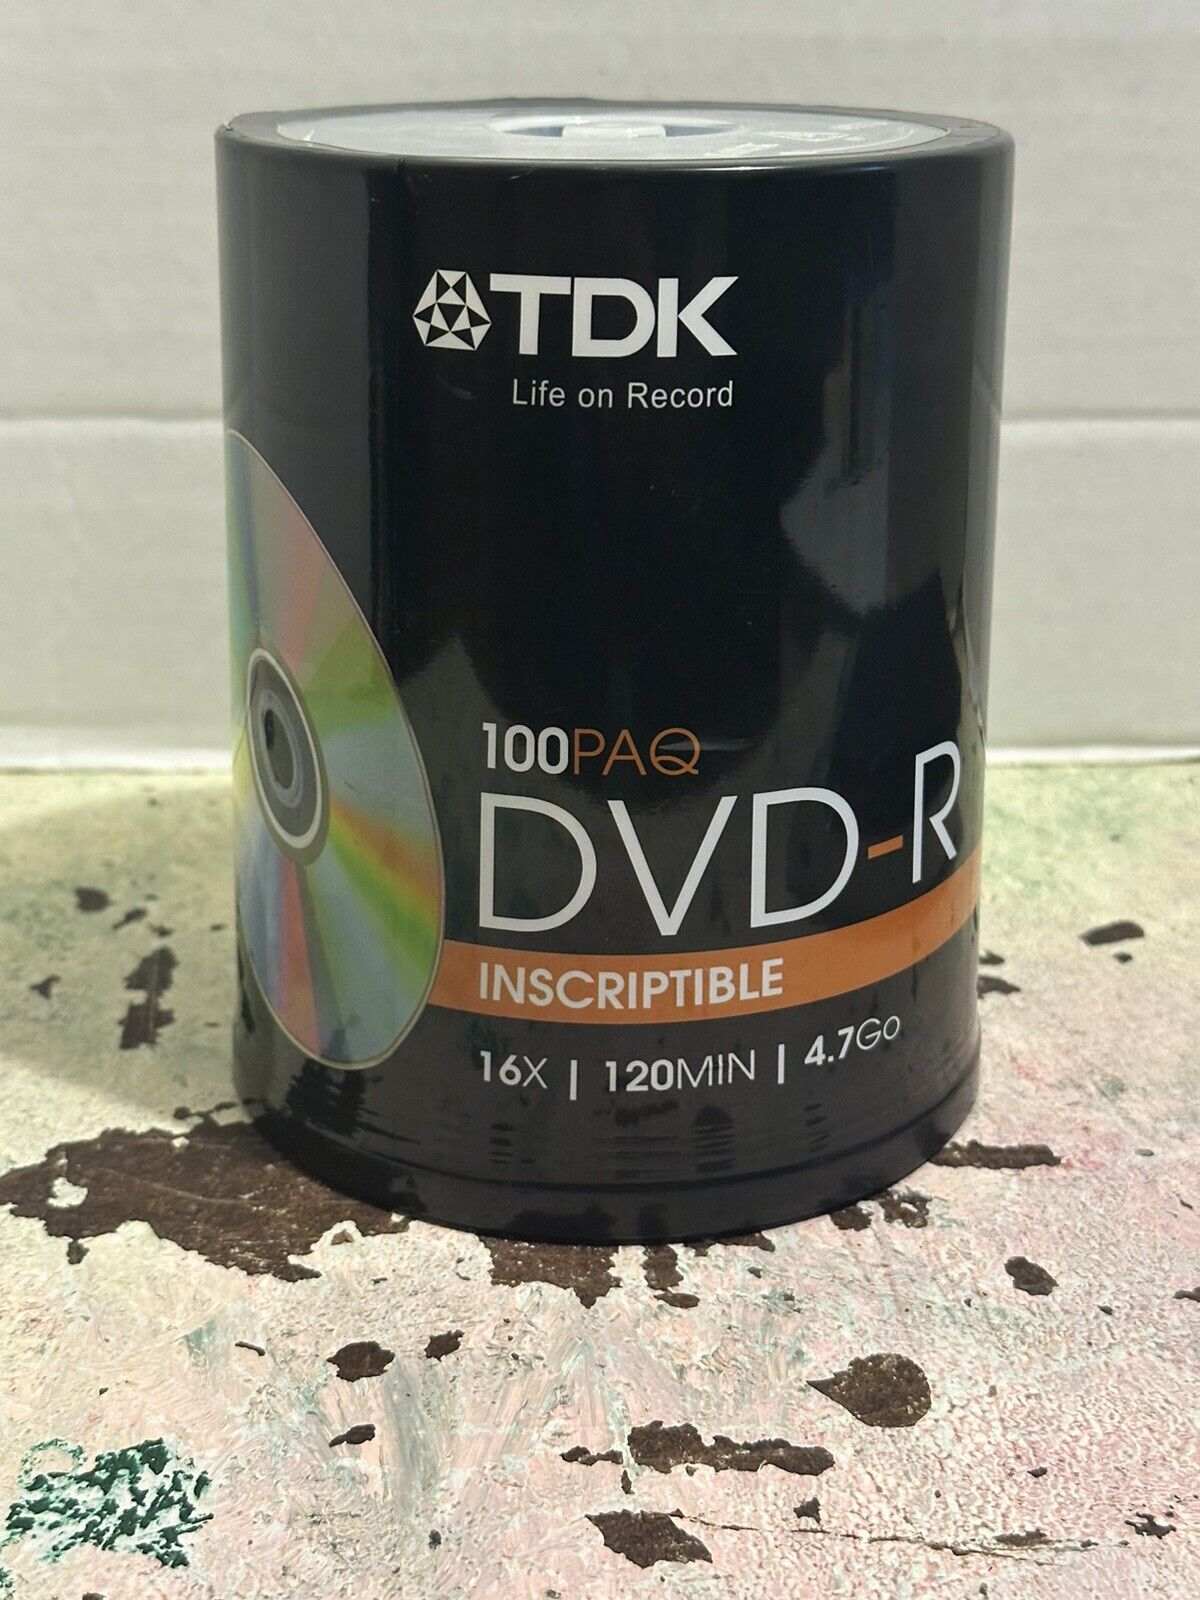 TDK DVD-R 16x 120min 4.7 GB Recordable Discs, 100 Pack Spindle NEW FAST SHIP